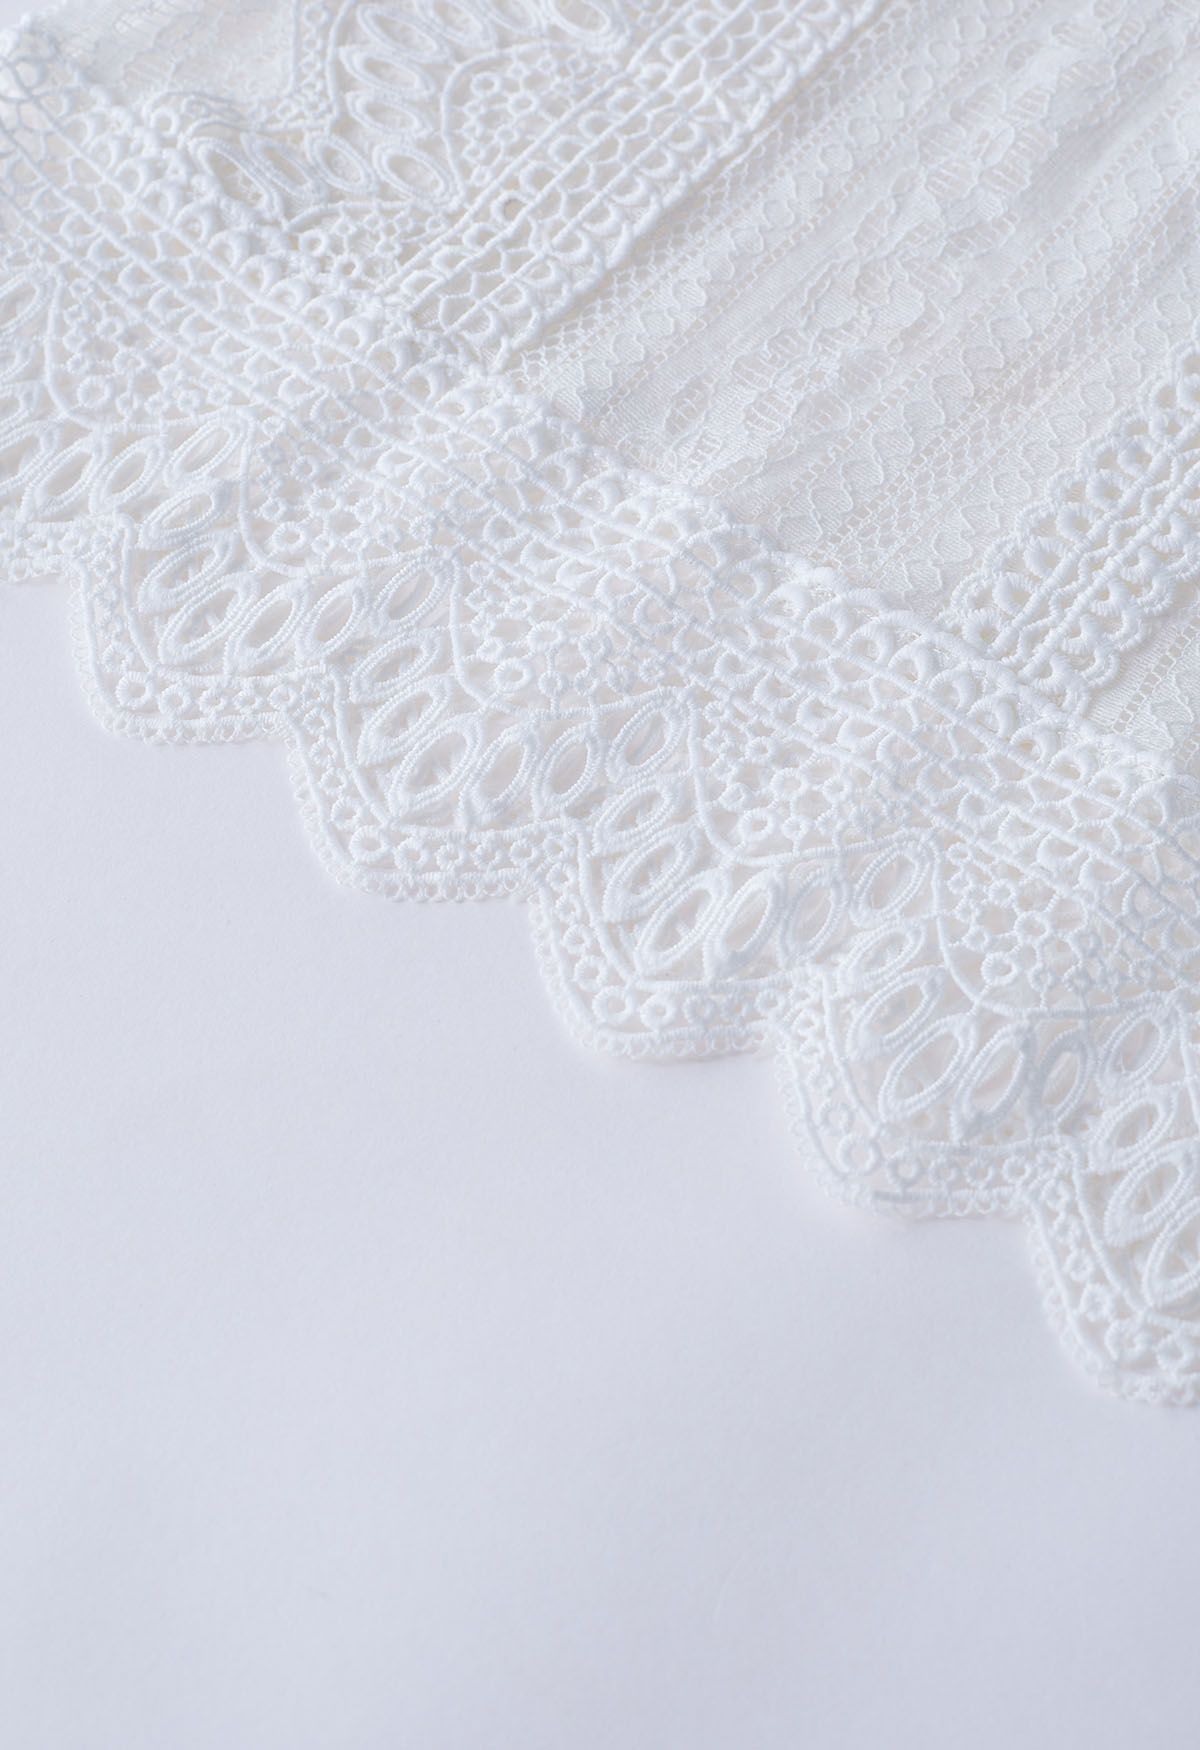 Sheer Sleeve Spliced Cutwork Lace Top in White